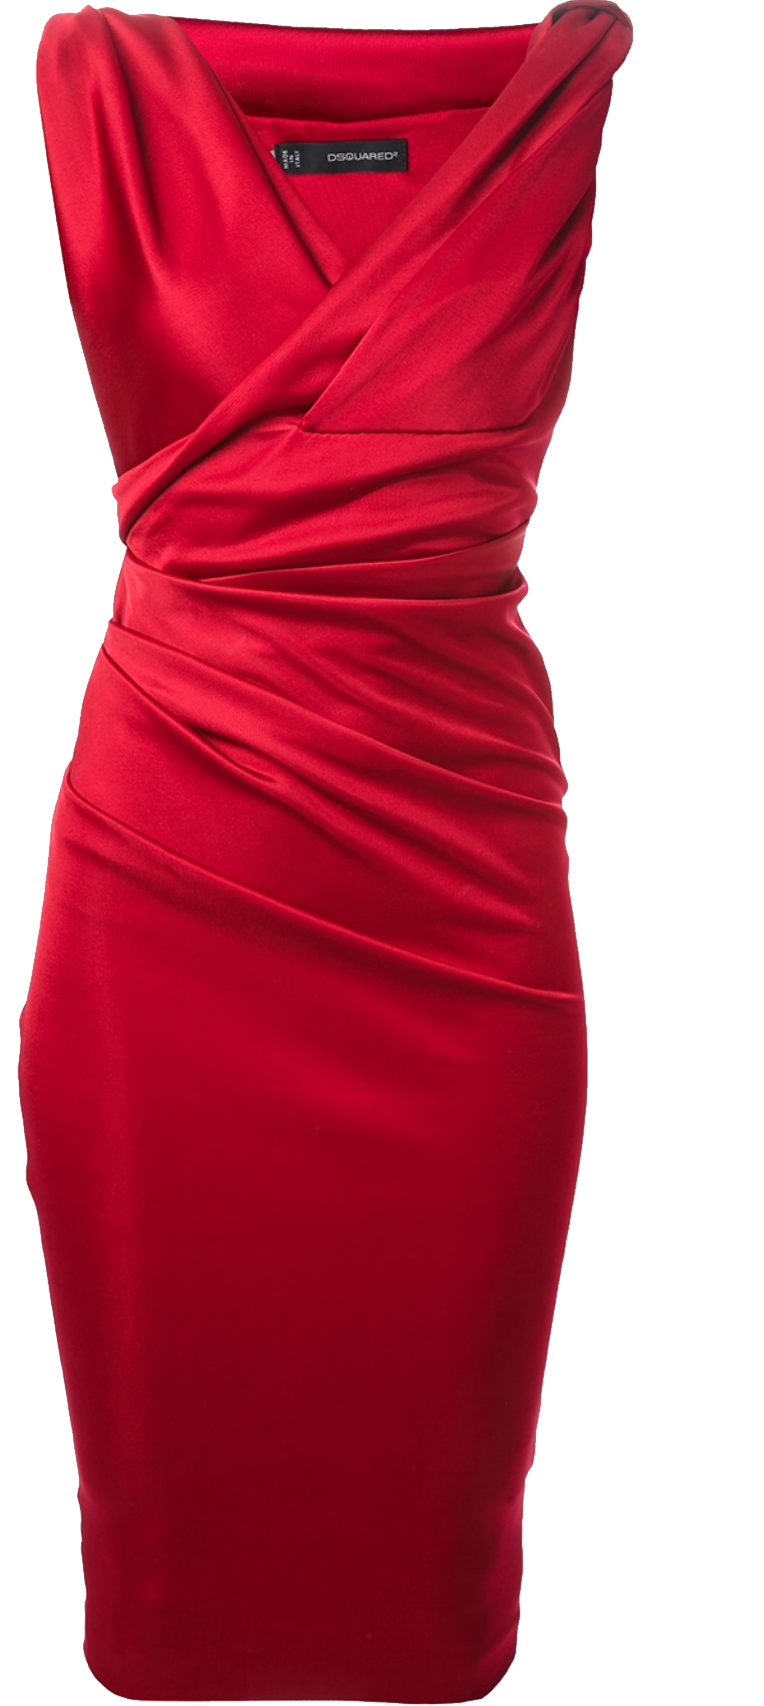 Dsquared2 red satin sleeveless gathered cocktail dress